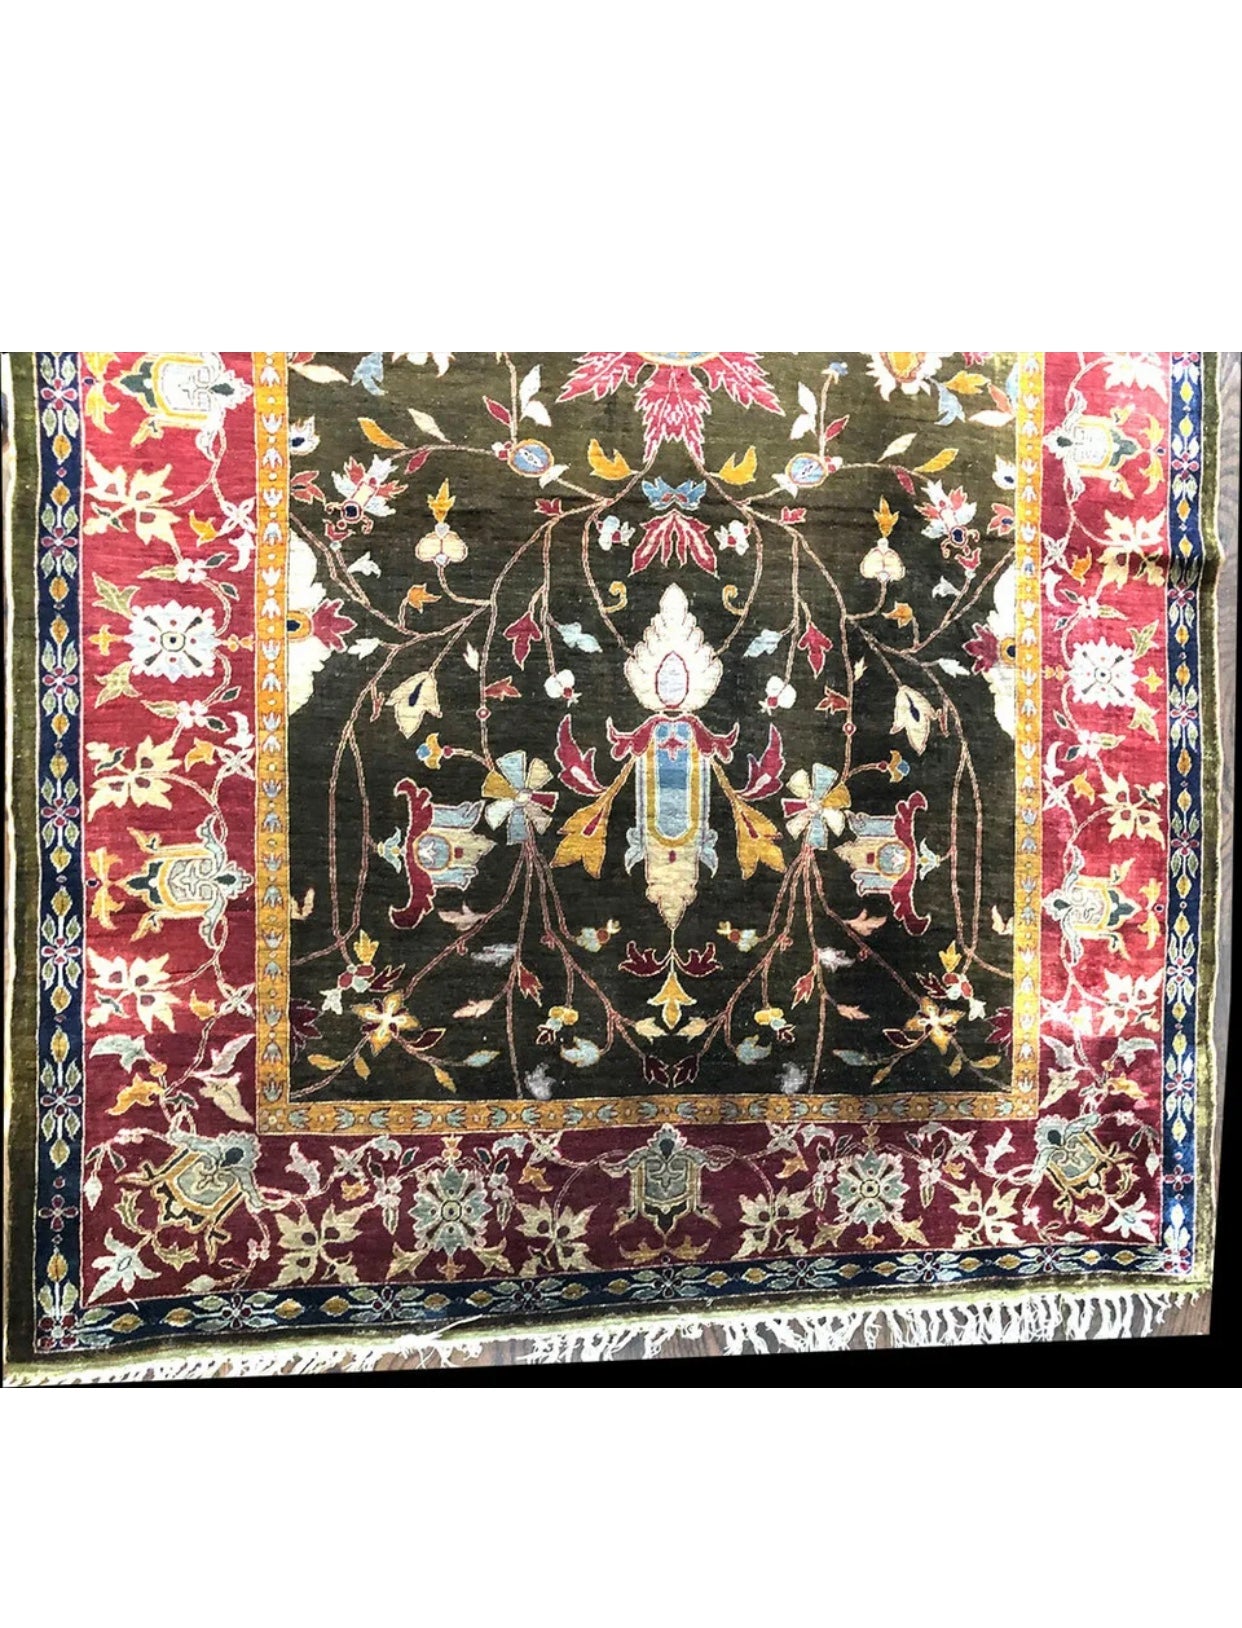 A Collectible Museum Quality Antique 100% Silk Mughal Area Rug